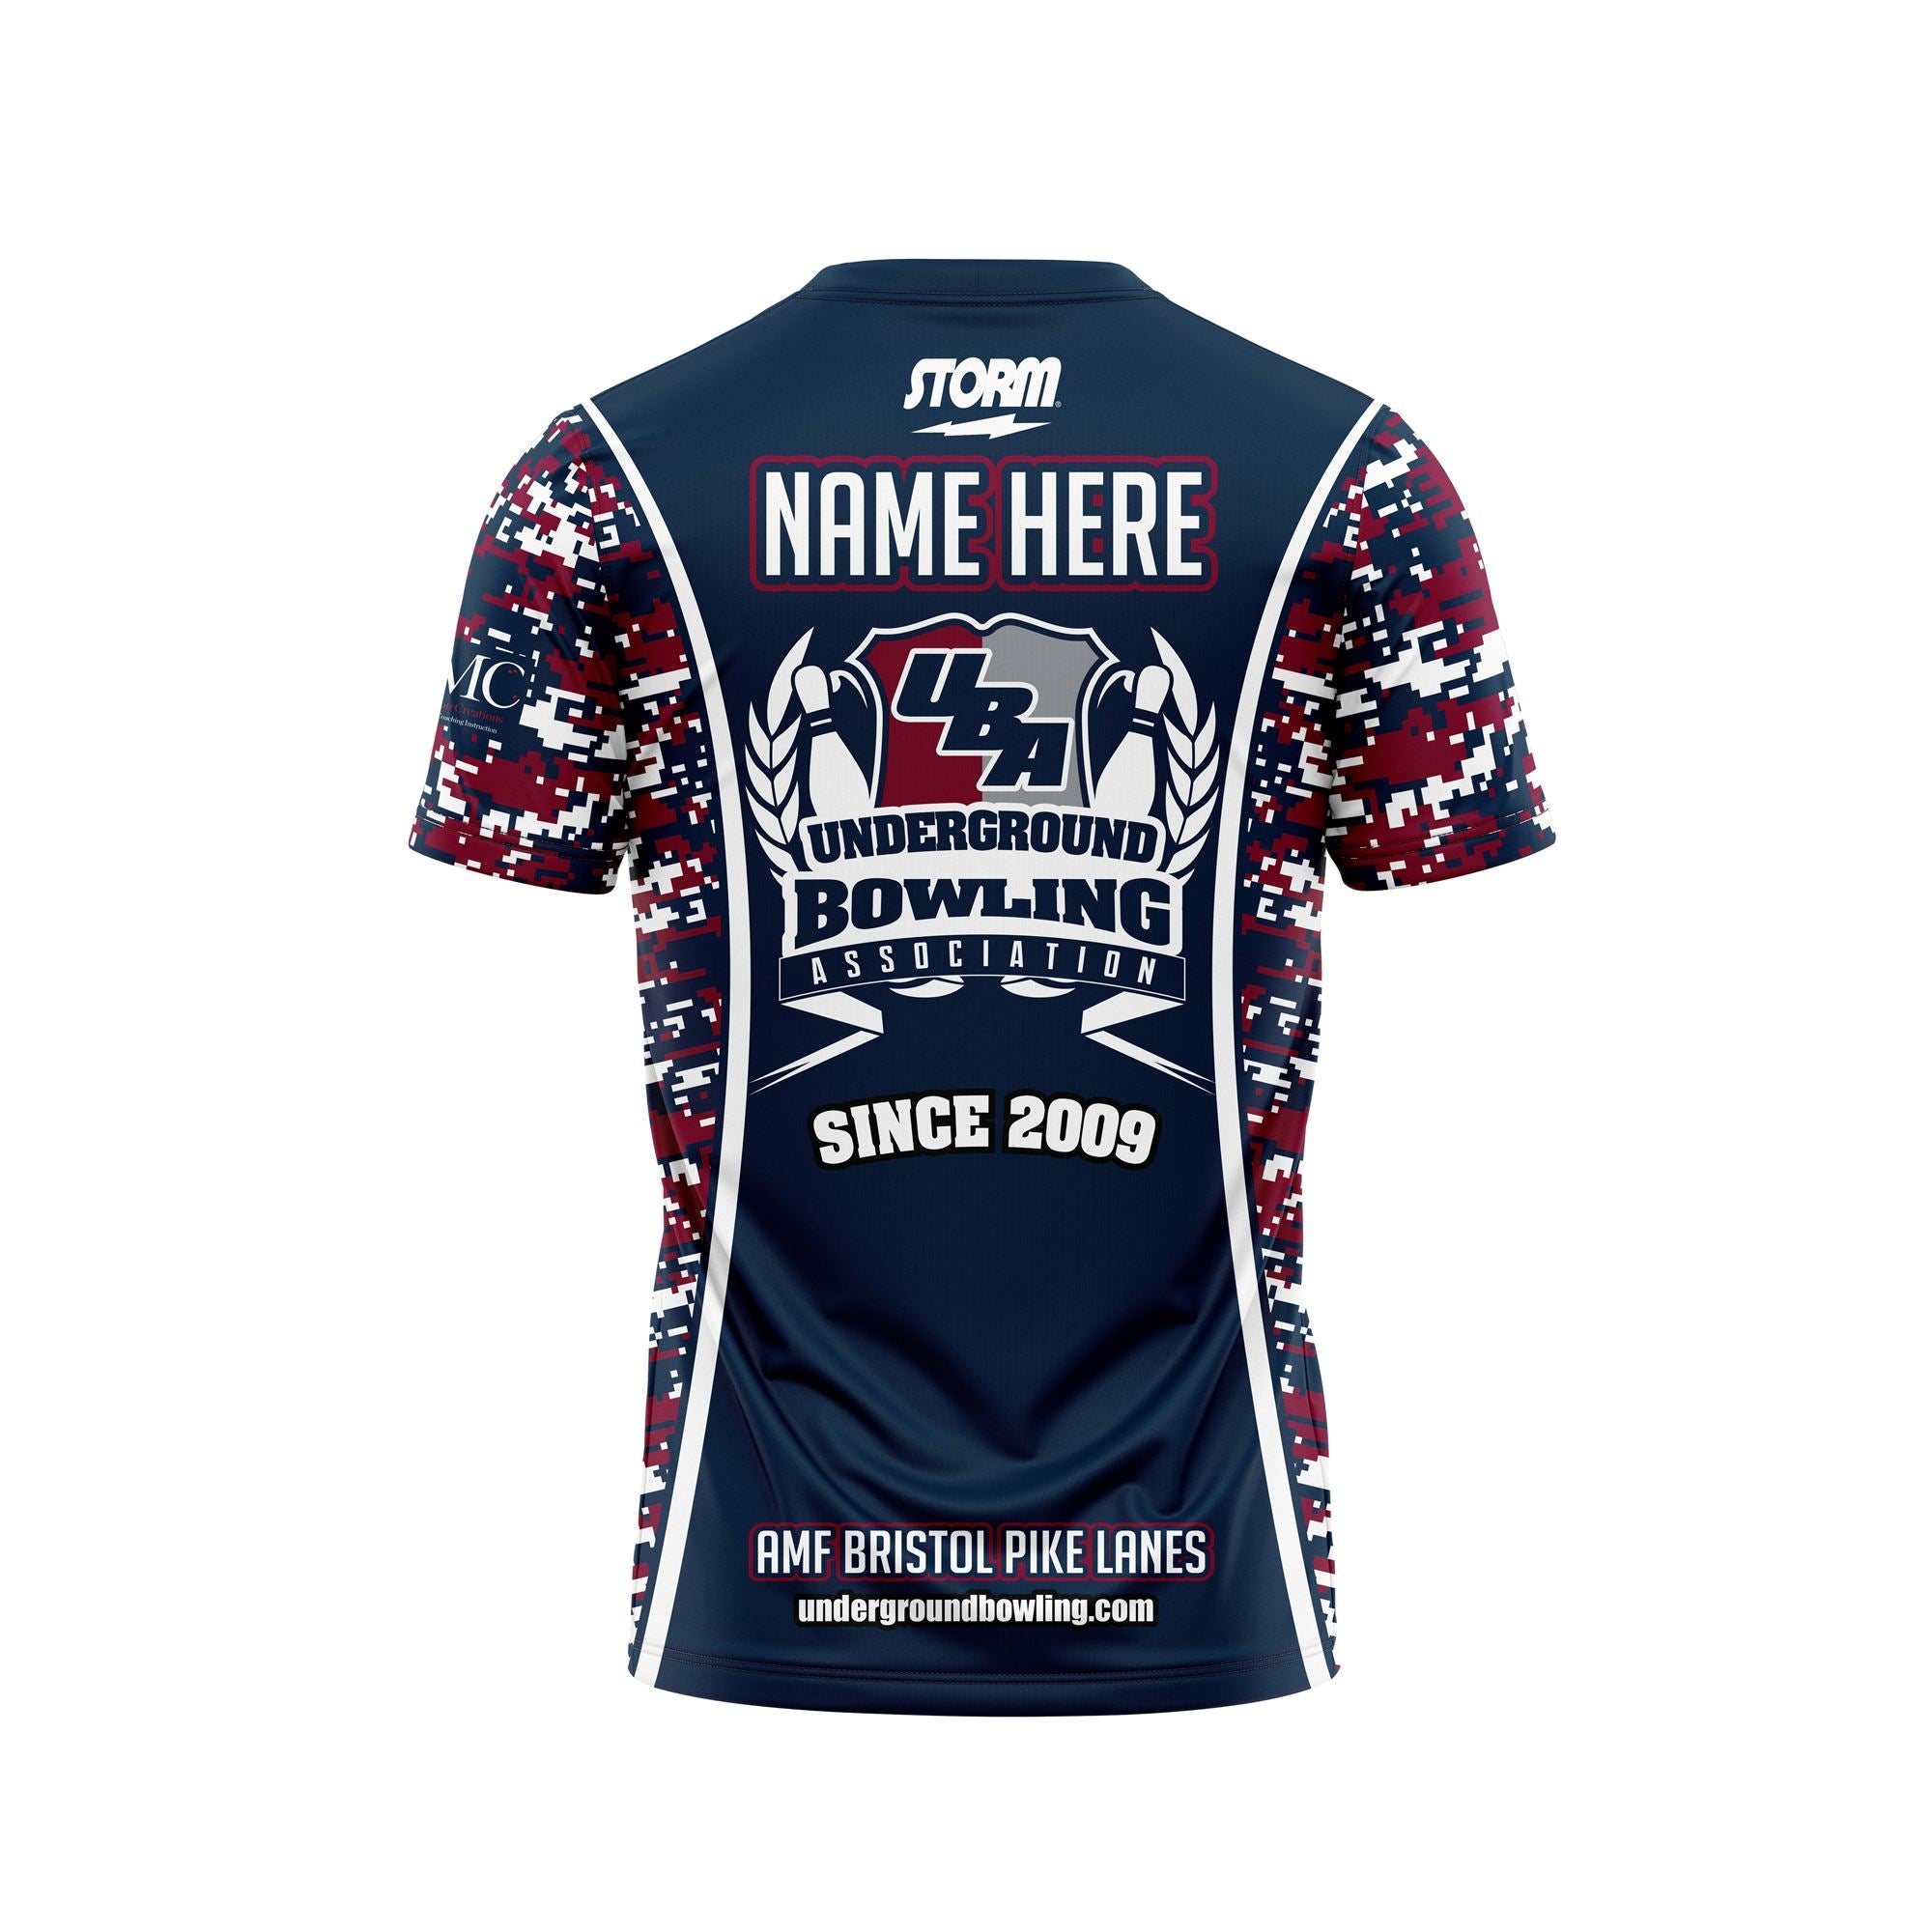 ALL-IN! Home / Main Jerseys